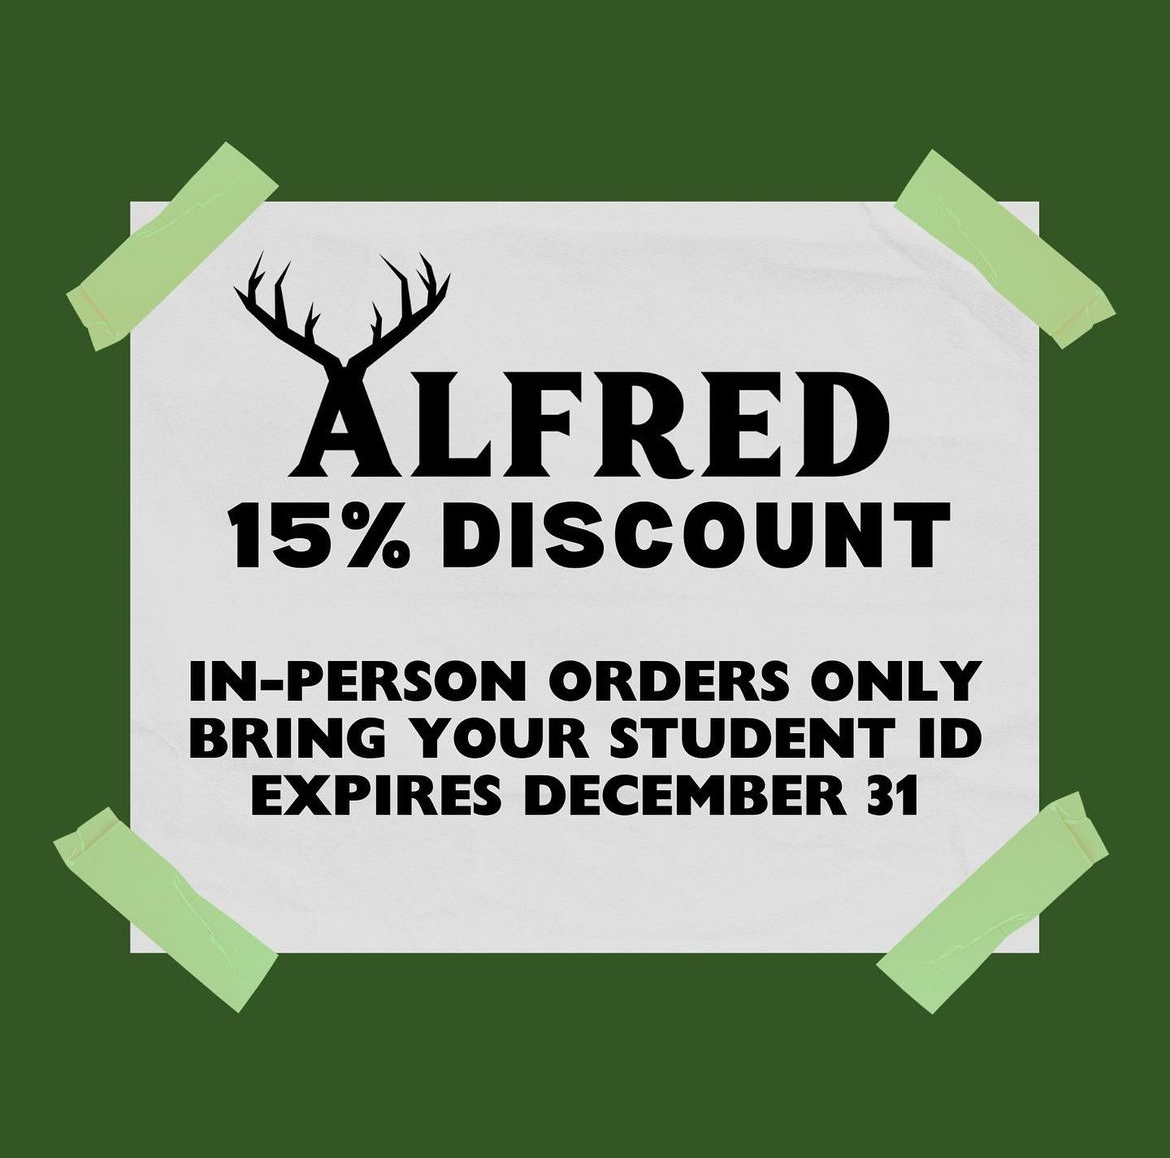 Prefect+Council+announced+the+Alfred+Coffee+student+discount+in+an+email+to+upper+school+students.+